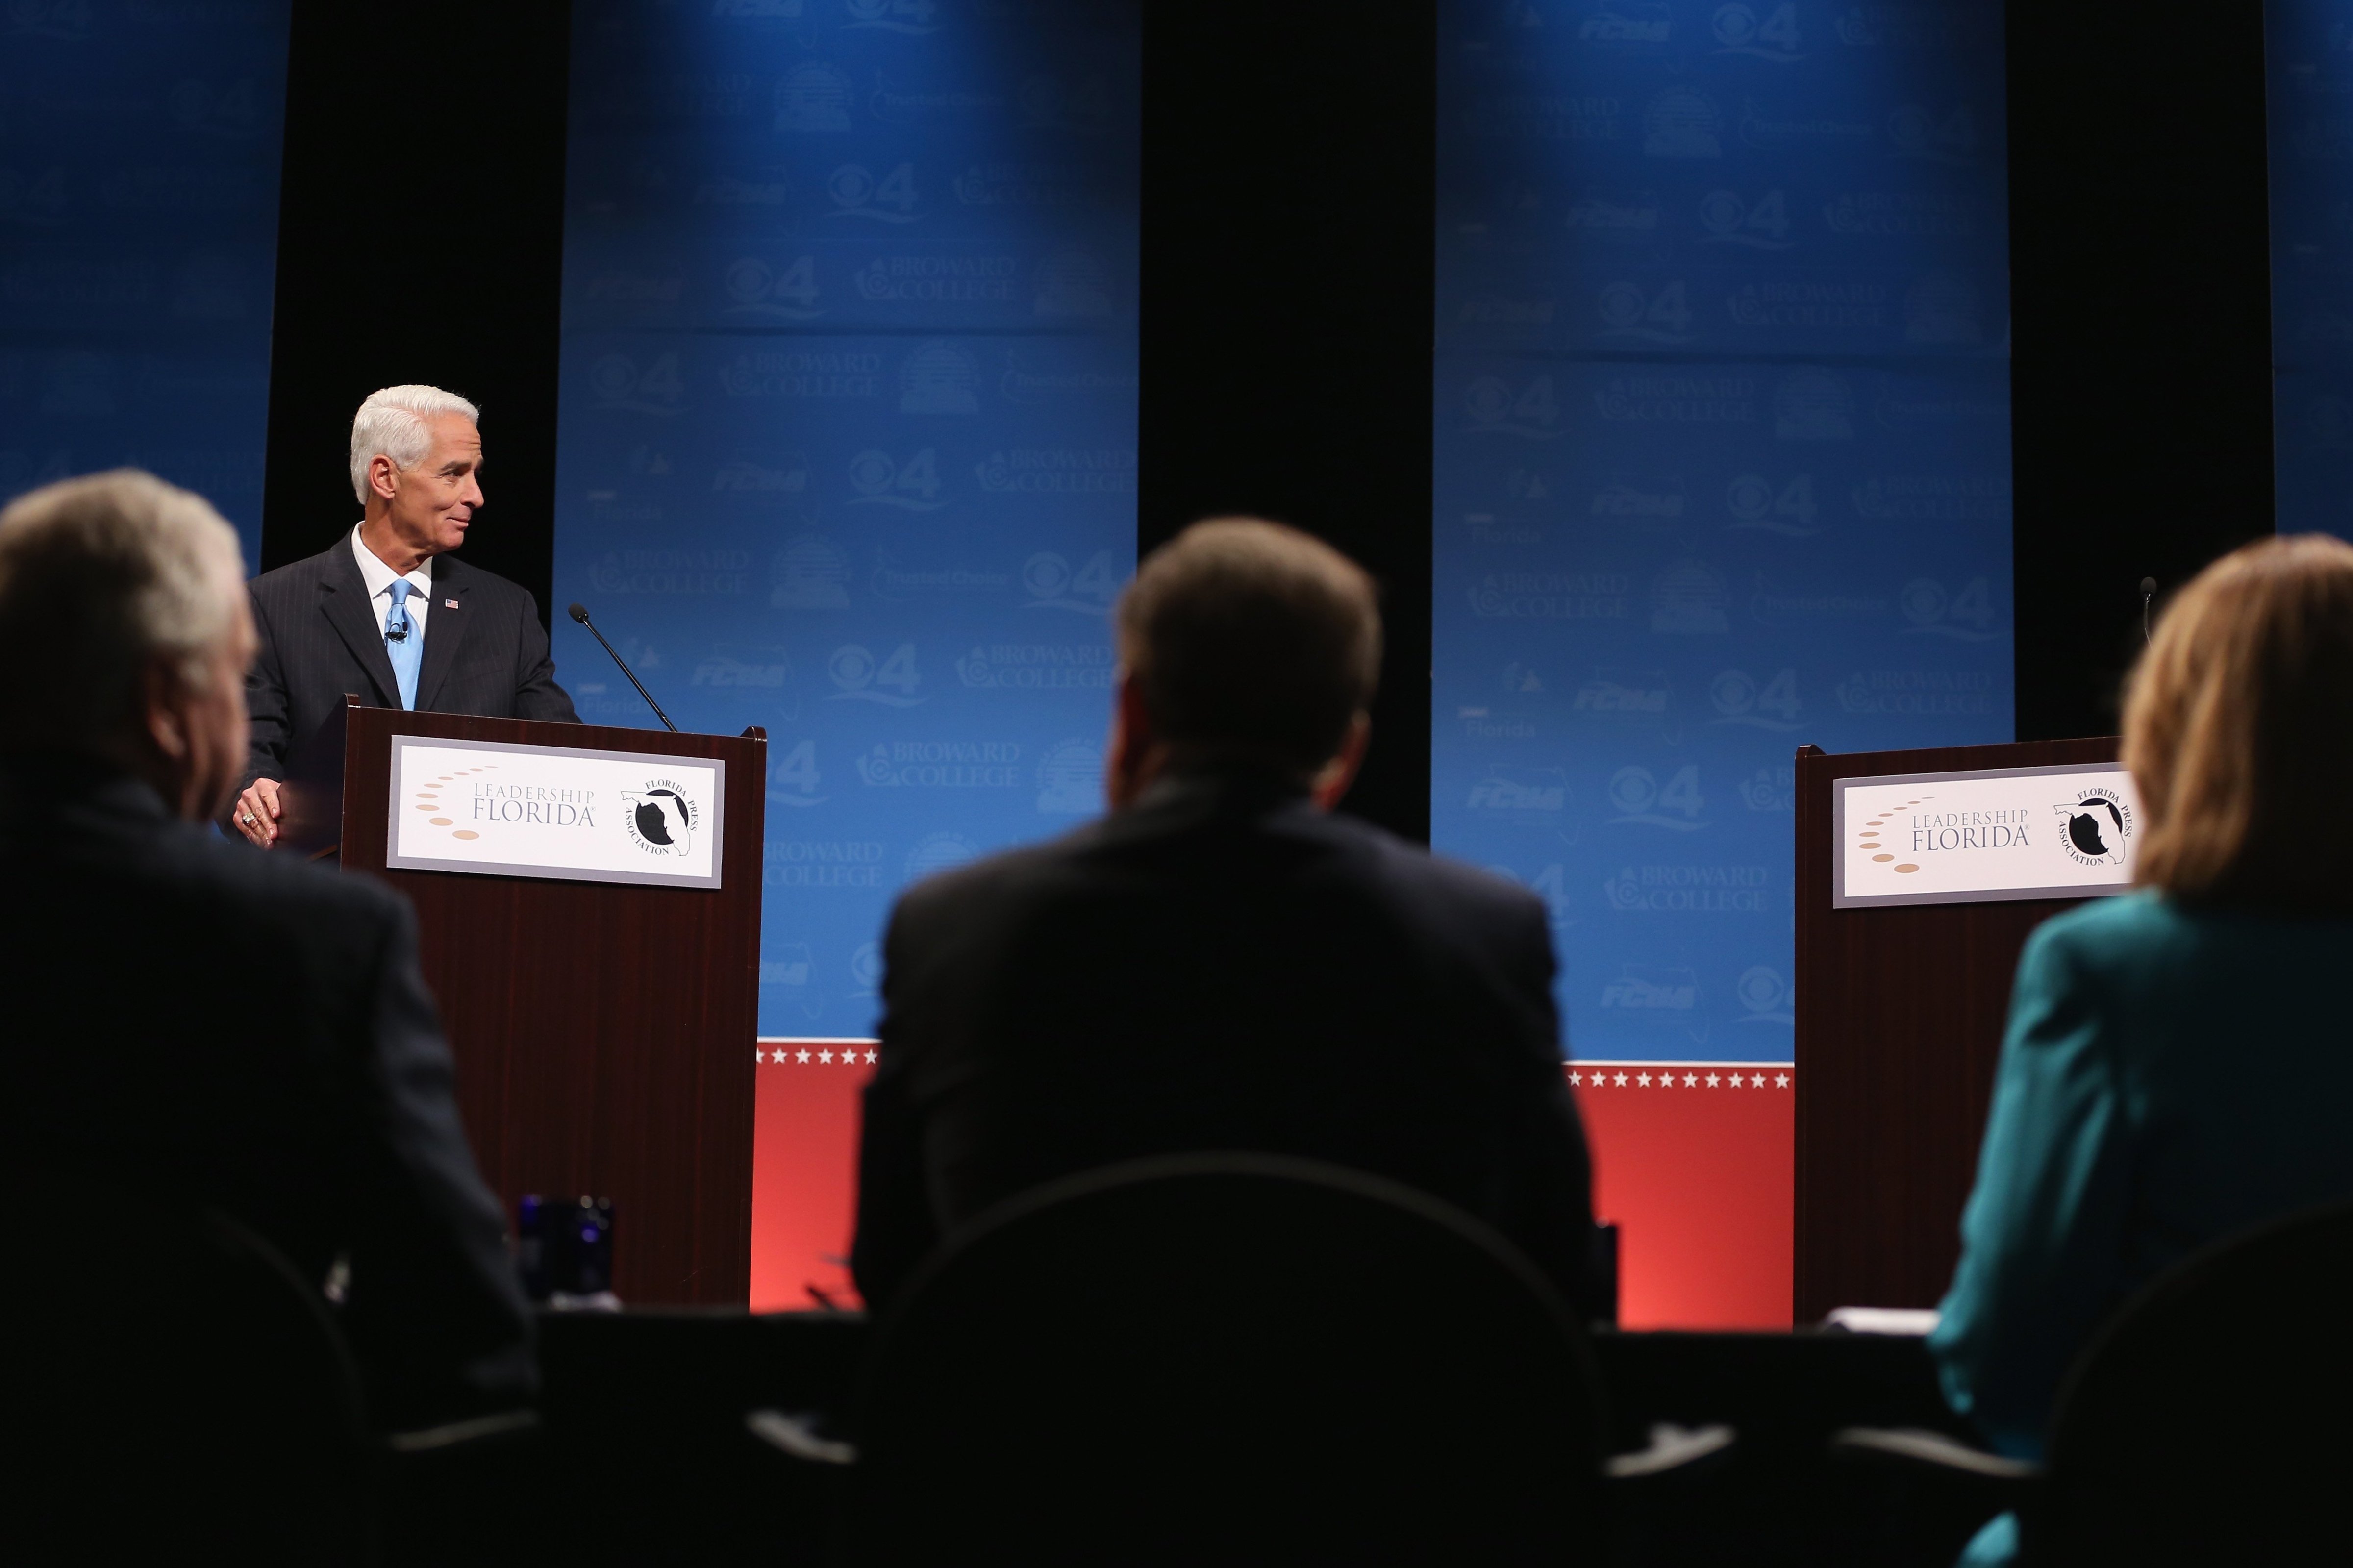 Former Florida Governor and Democratic candidate for Governor Charlie Crist waits next to an empty podium for Republican Florida Governor Rick Scott who delayed his entry onto the stage due to an electric fan that Crist had at his podium at a televised debate at Broward College on Oct. 15, 2014 in Davie, Florida. (Joe Raedle—Getty Images)